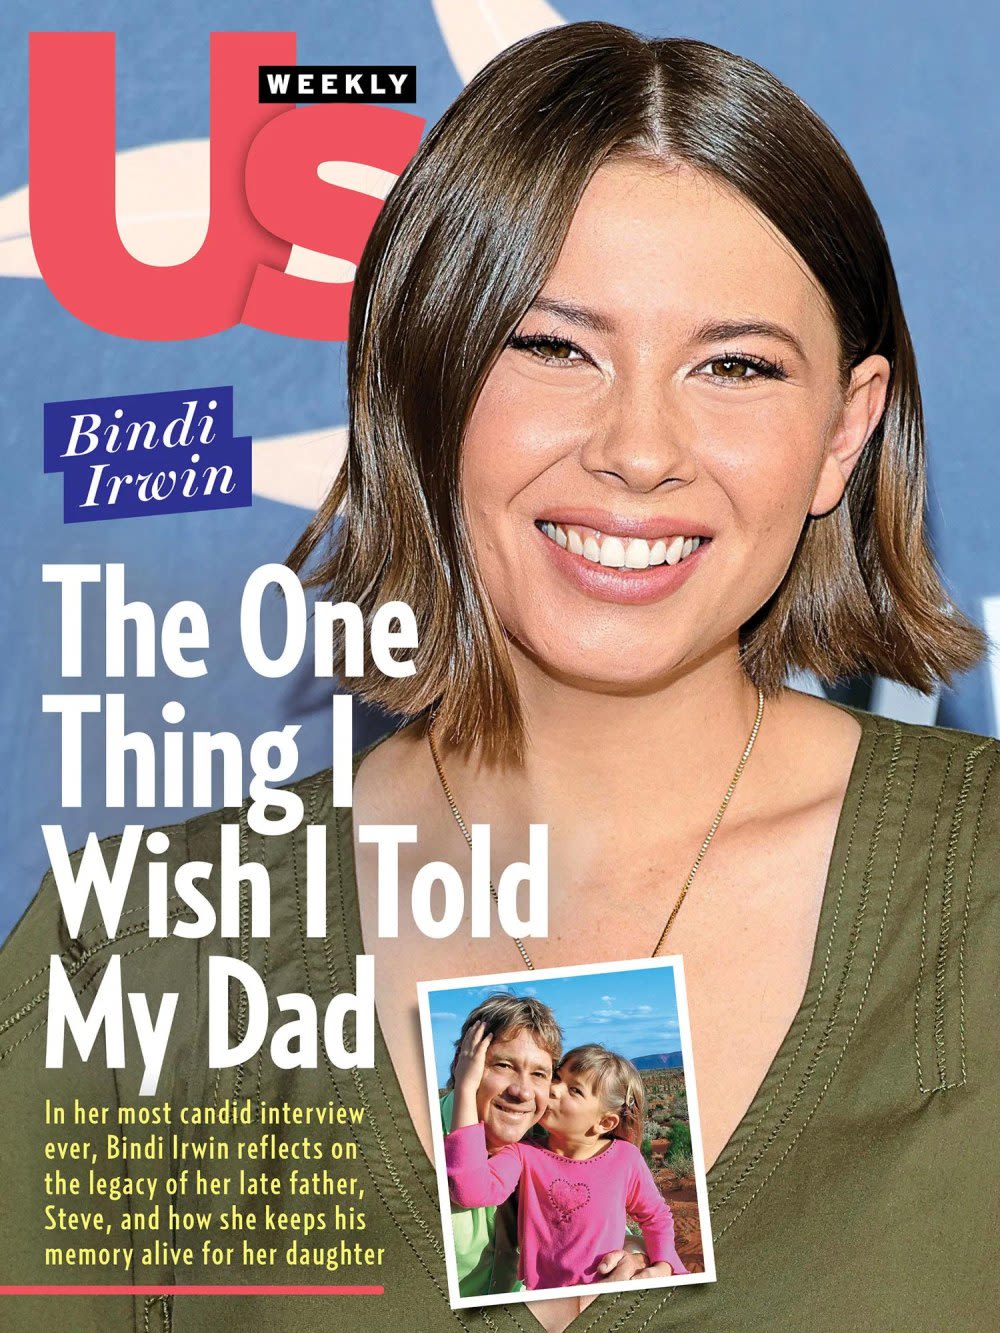 Bindi Irwin Shares ‘The One Thing’ She Wants to Tell Dad Steve Irwin